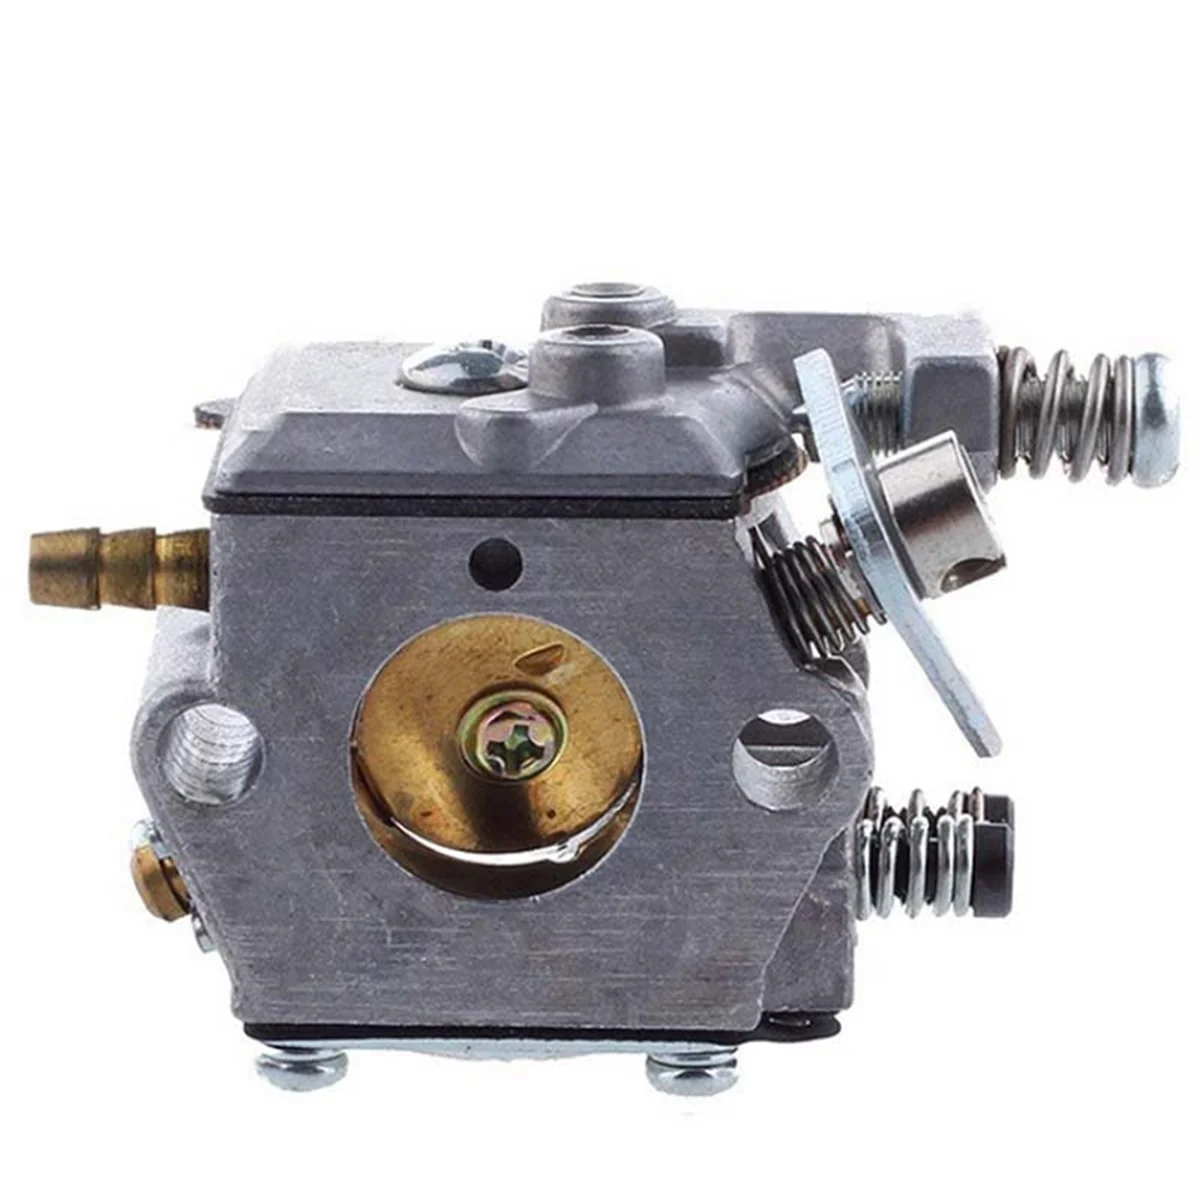 

Srm4605 Carburetor Fits for Echo Srm-4605 4600 3800 Strimmer Carb Ay Brush Cutter Carb Asy Carburettor for Walbro Wt-120